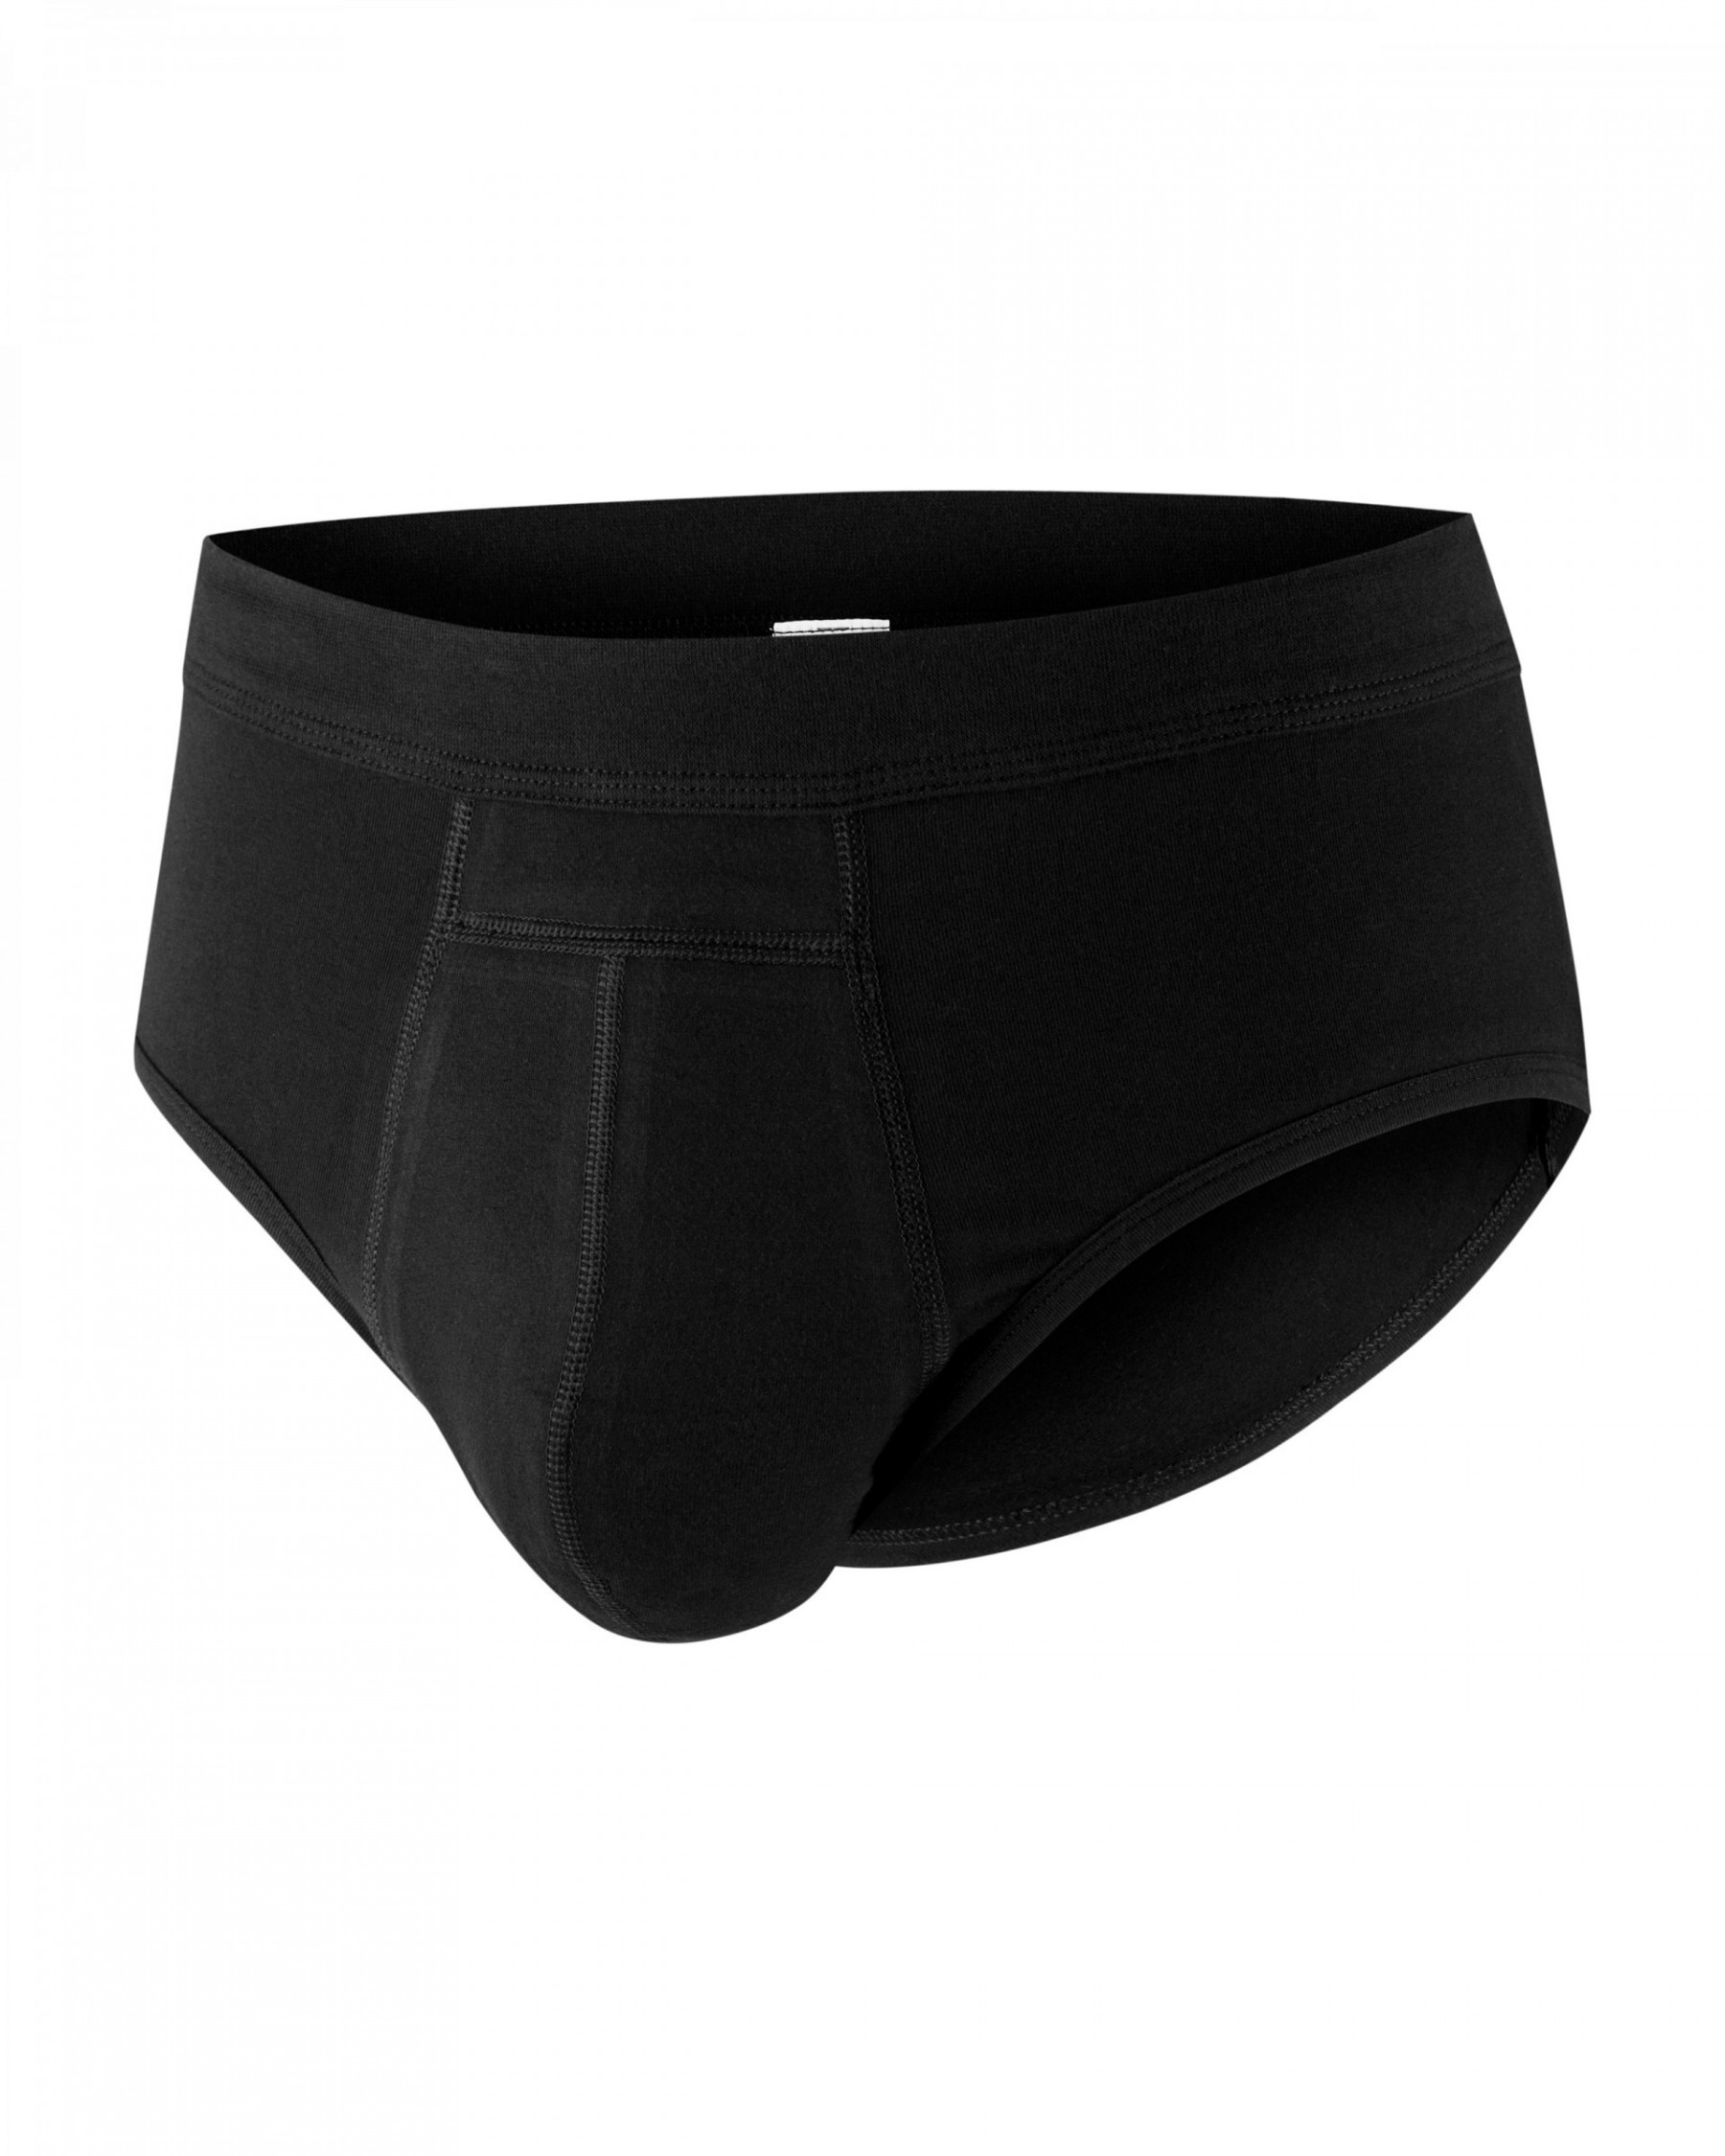 Men's Incontinence Briefs - ProtechDry